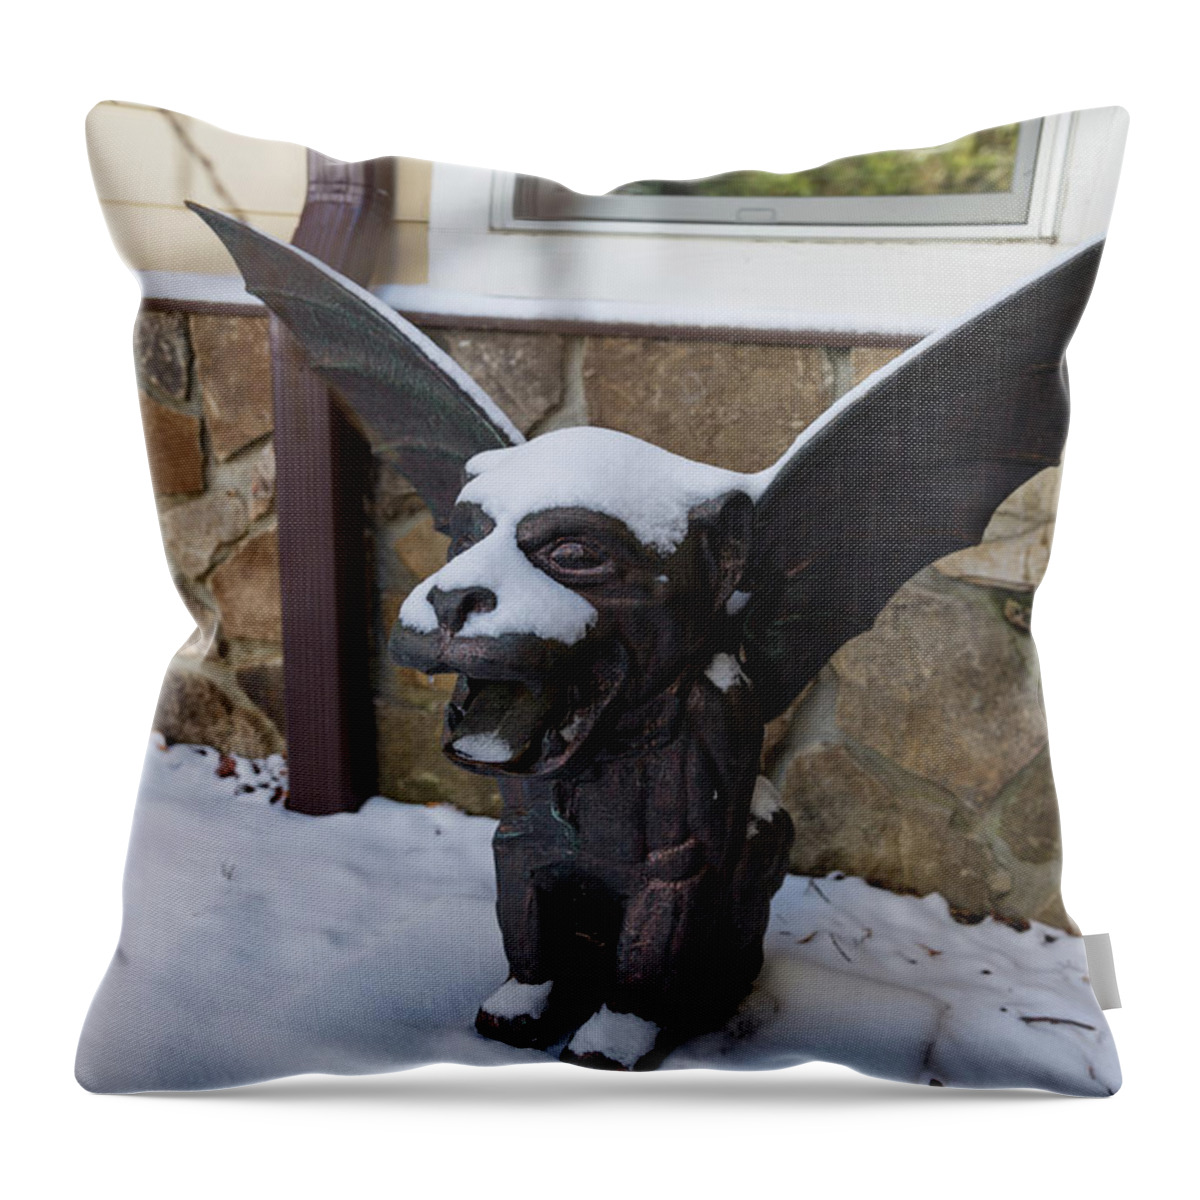 Gargoyle Throw Pillow featuring the photograph Chimera In The Snow by D K Wall